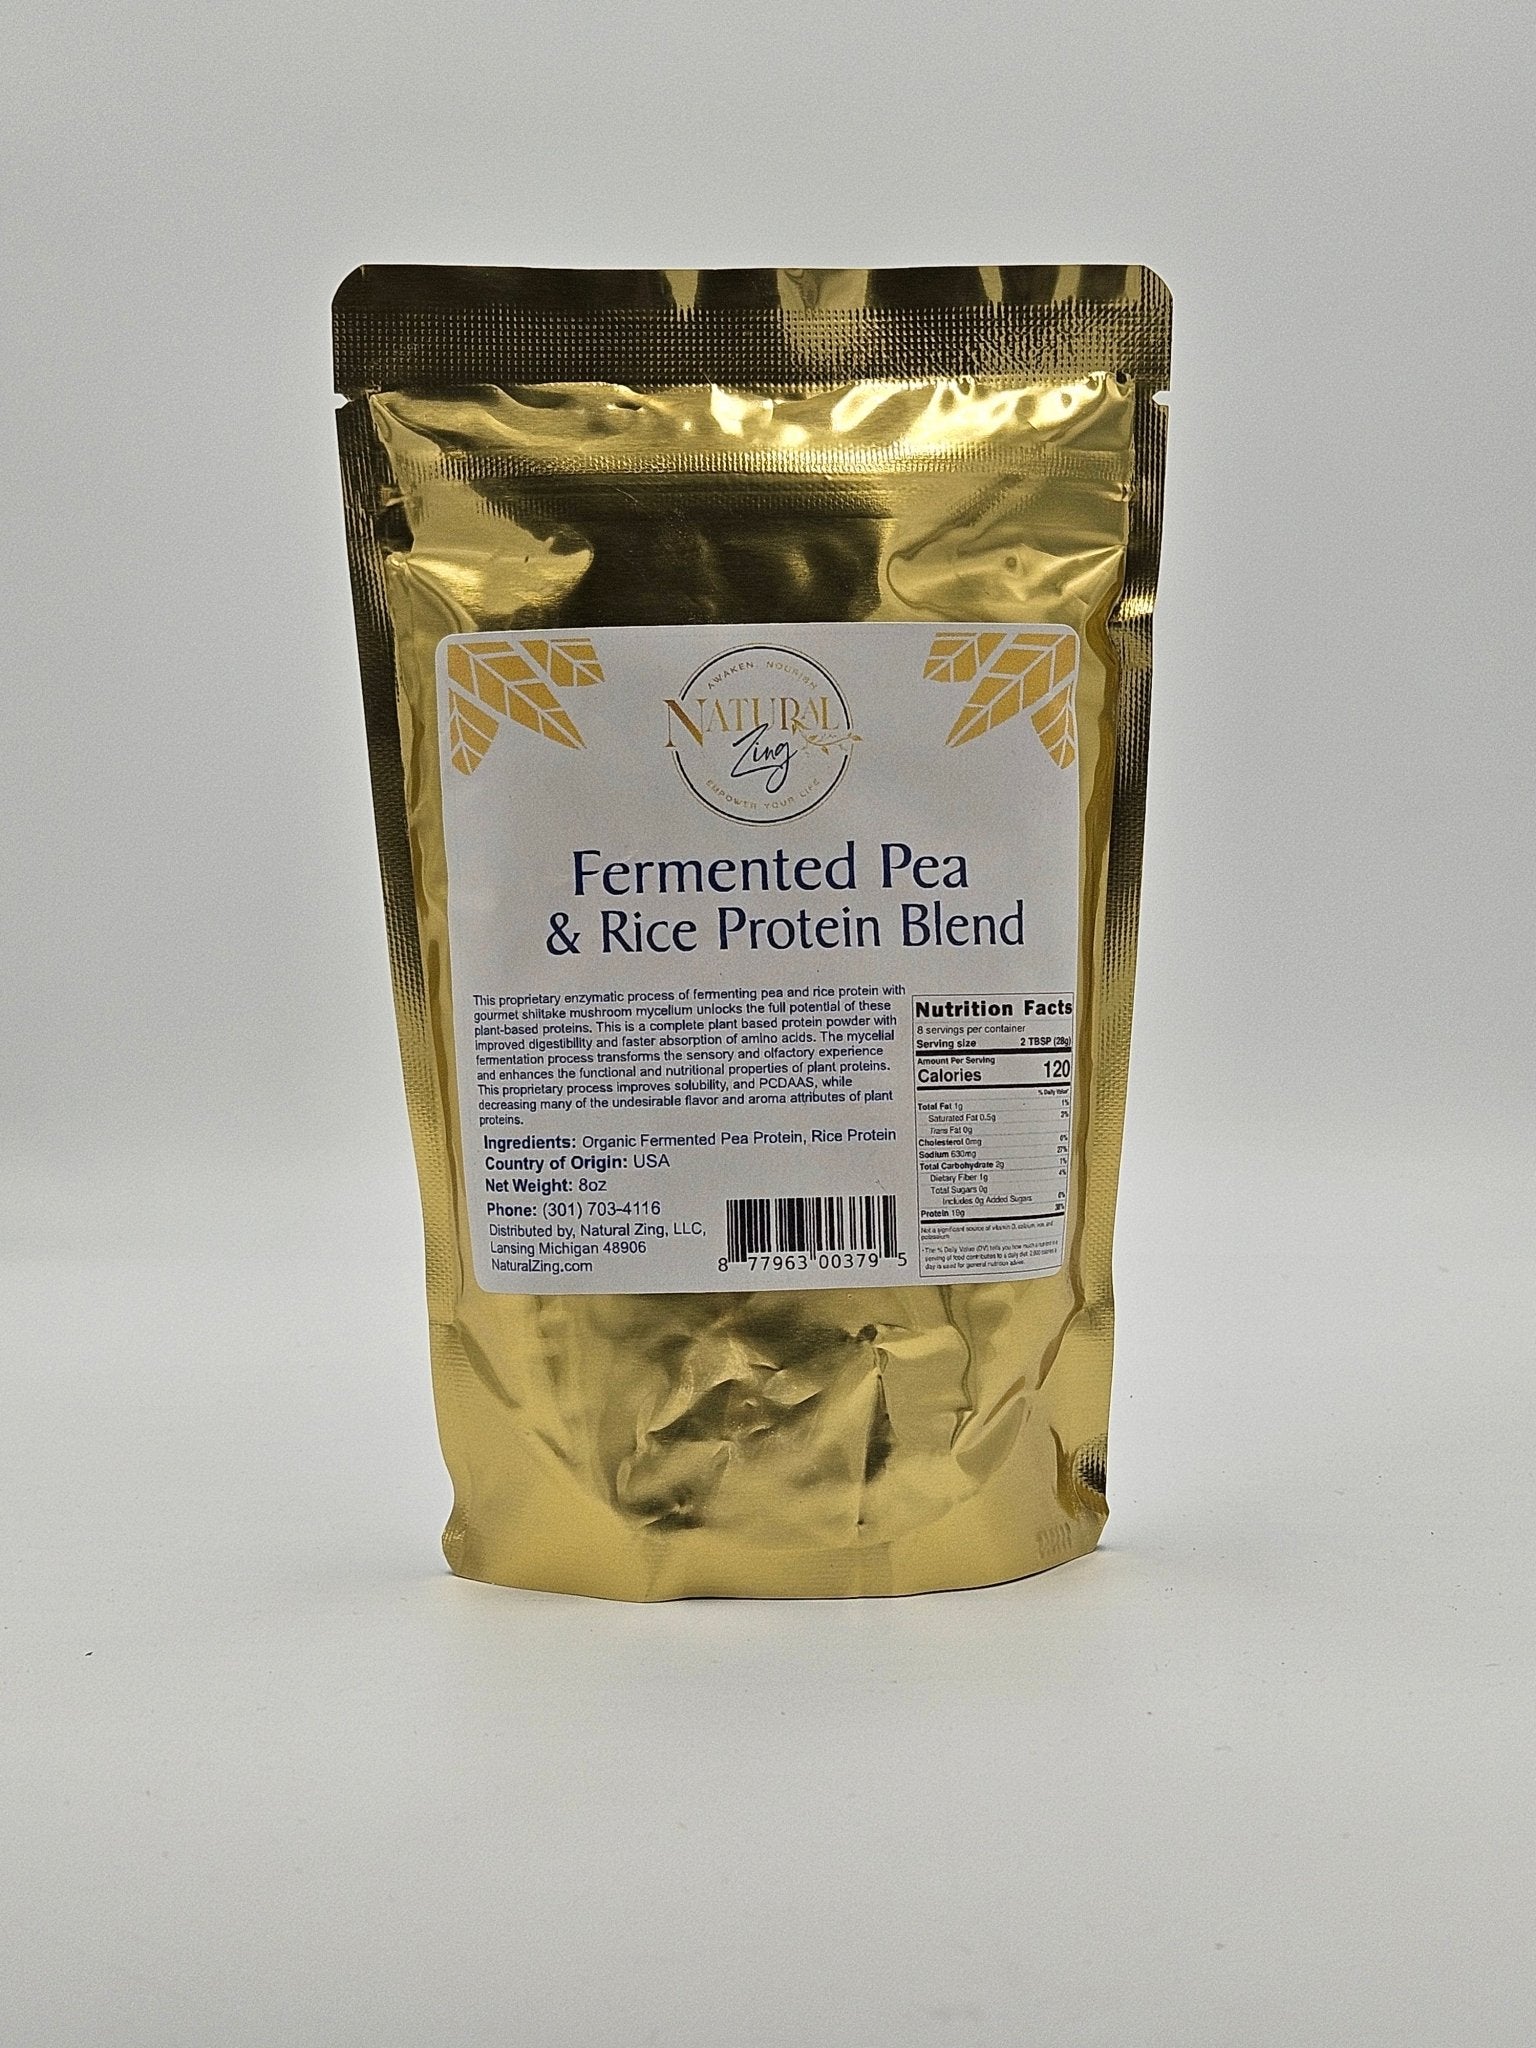 Fermented Brown Rice/Pea Protein Blend 8 oz